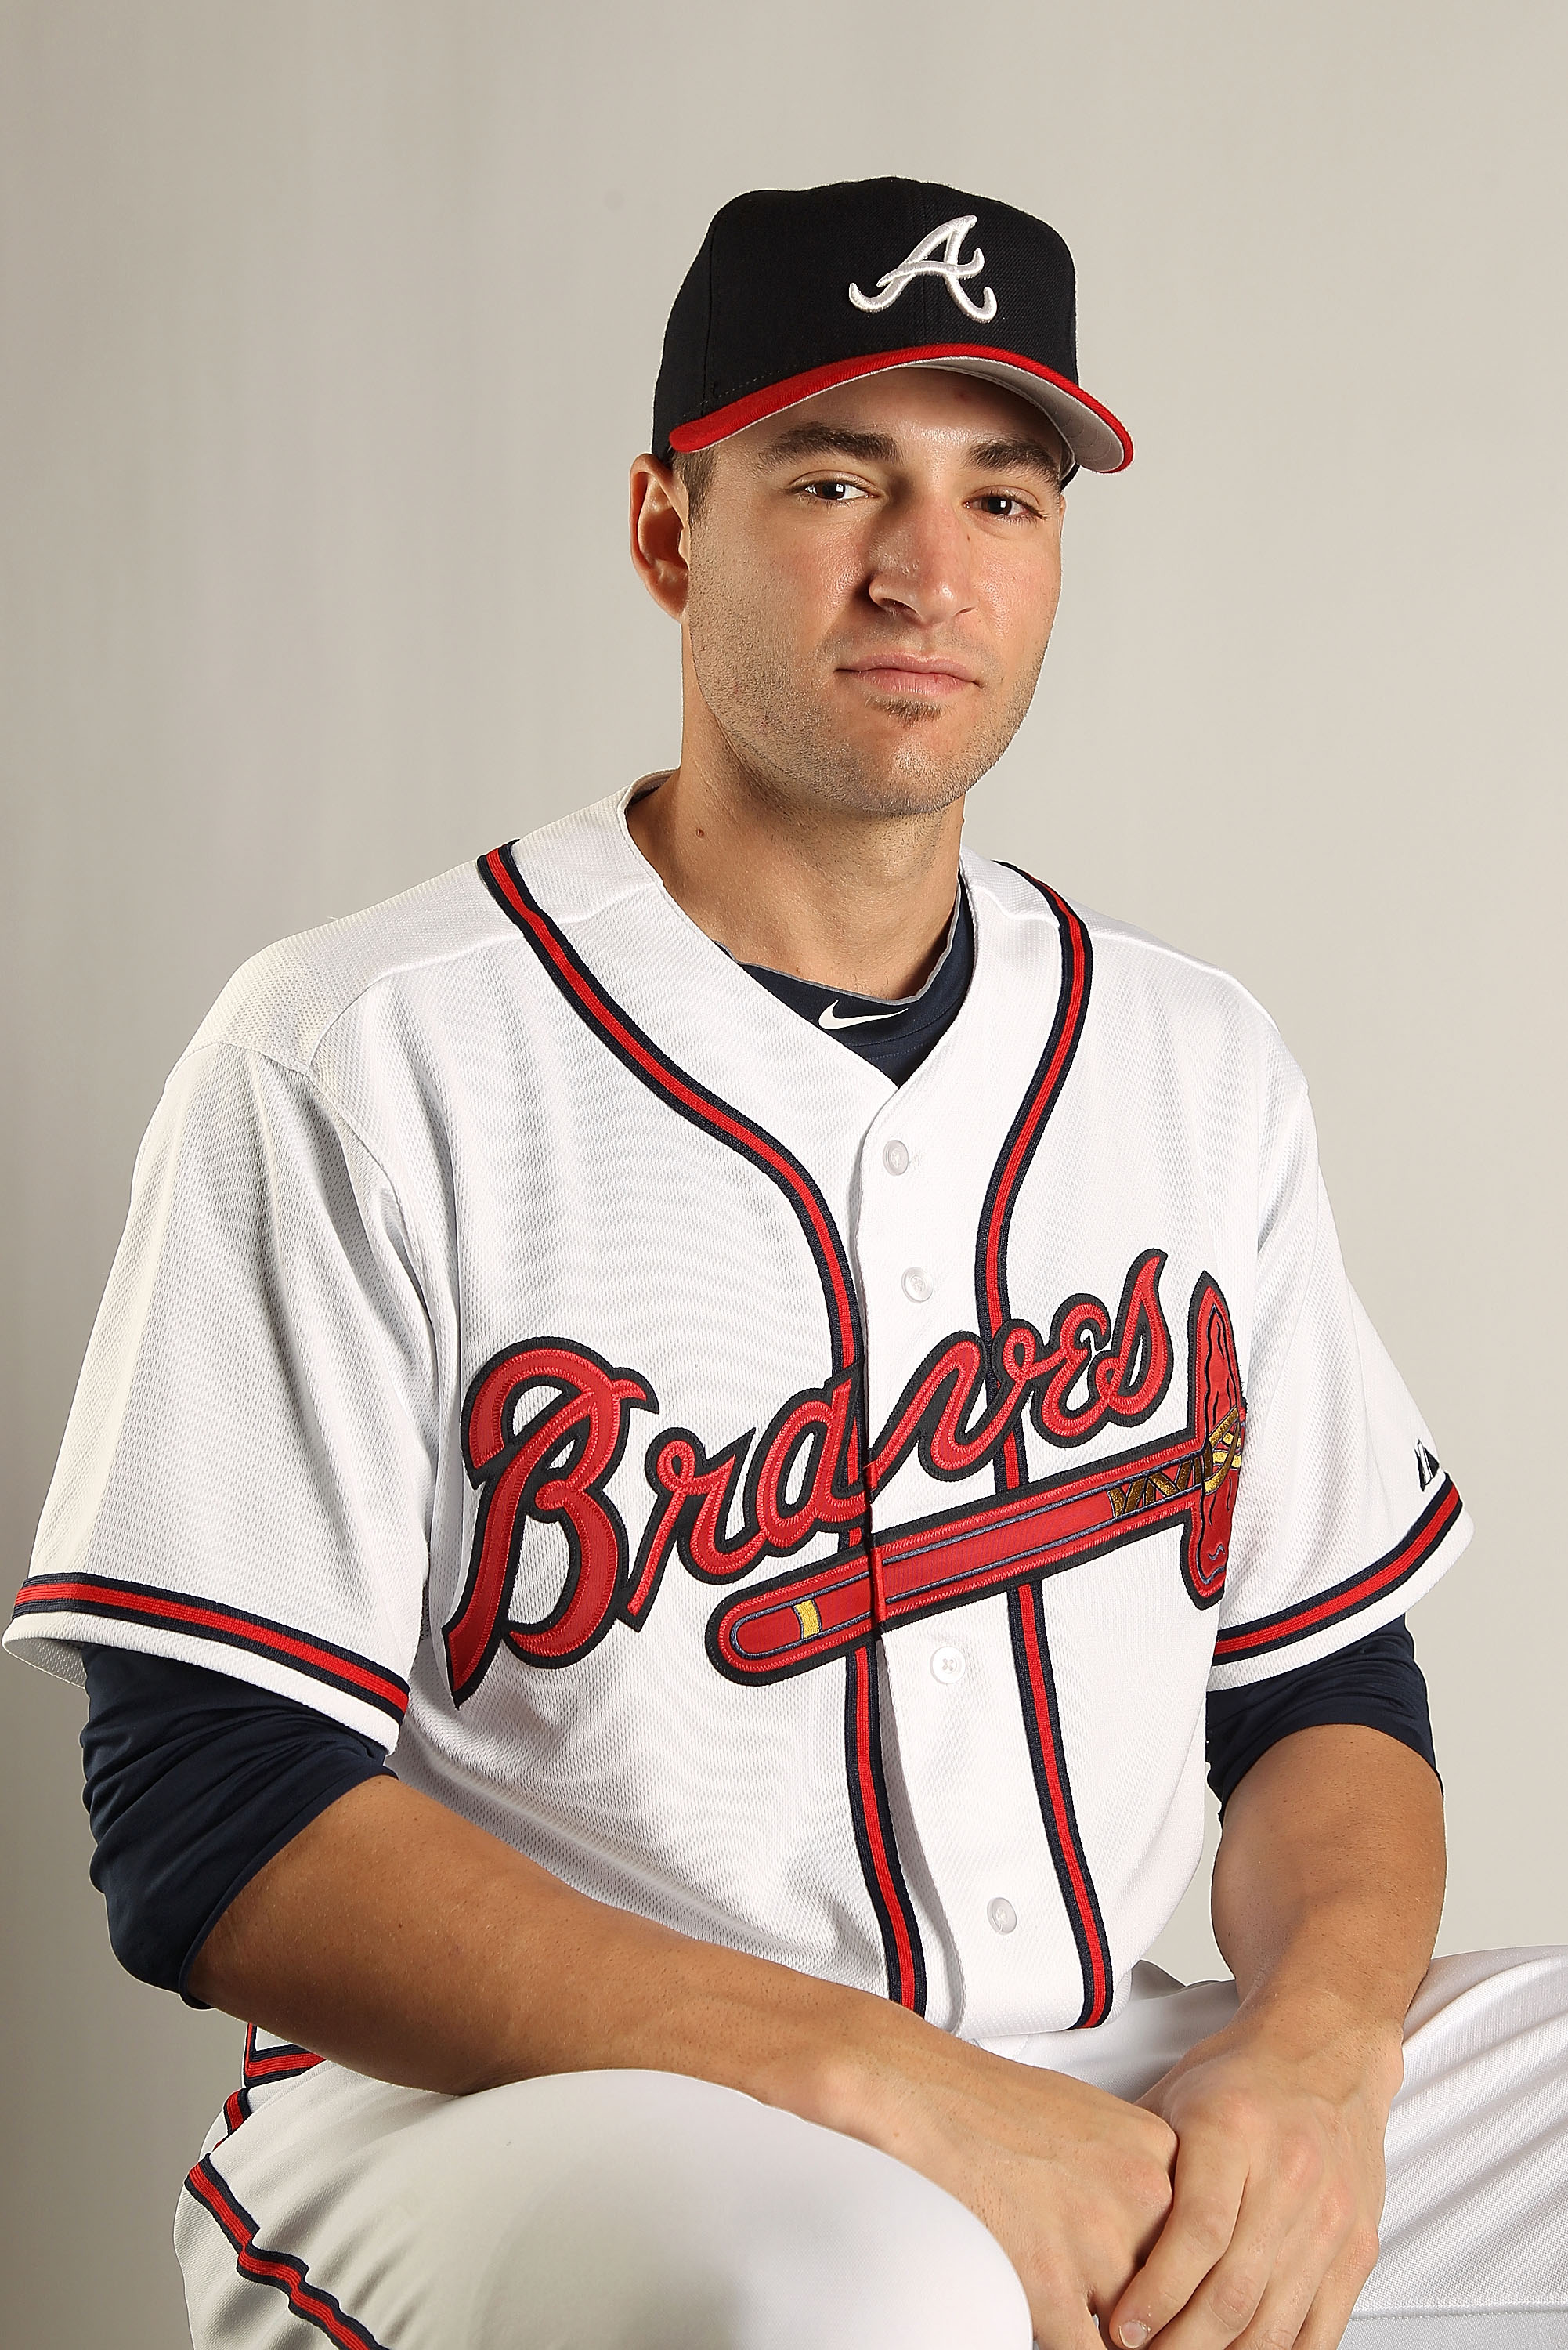 LAKE BUENA VISTA, FL - FEBRUARY 21: Brandon Beachy #37 of the Atlanta Braves during Photo Day at  Champion Stadium at ESPN Wide World of Sports of Complex on February 21, 2011 in Lake Buena Vista, Florida.  (Photo by Mike Ehrmann/Getty Images)